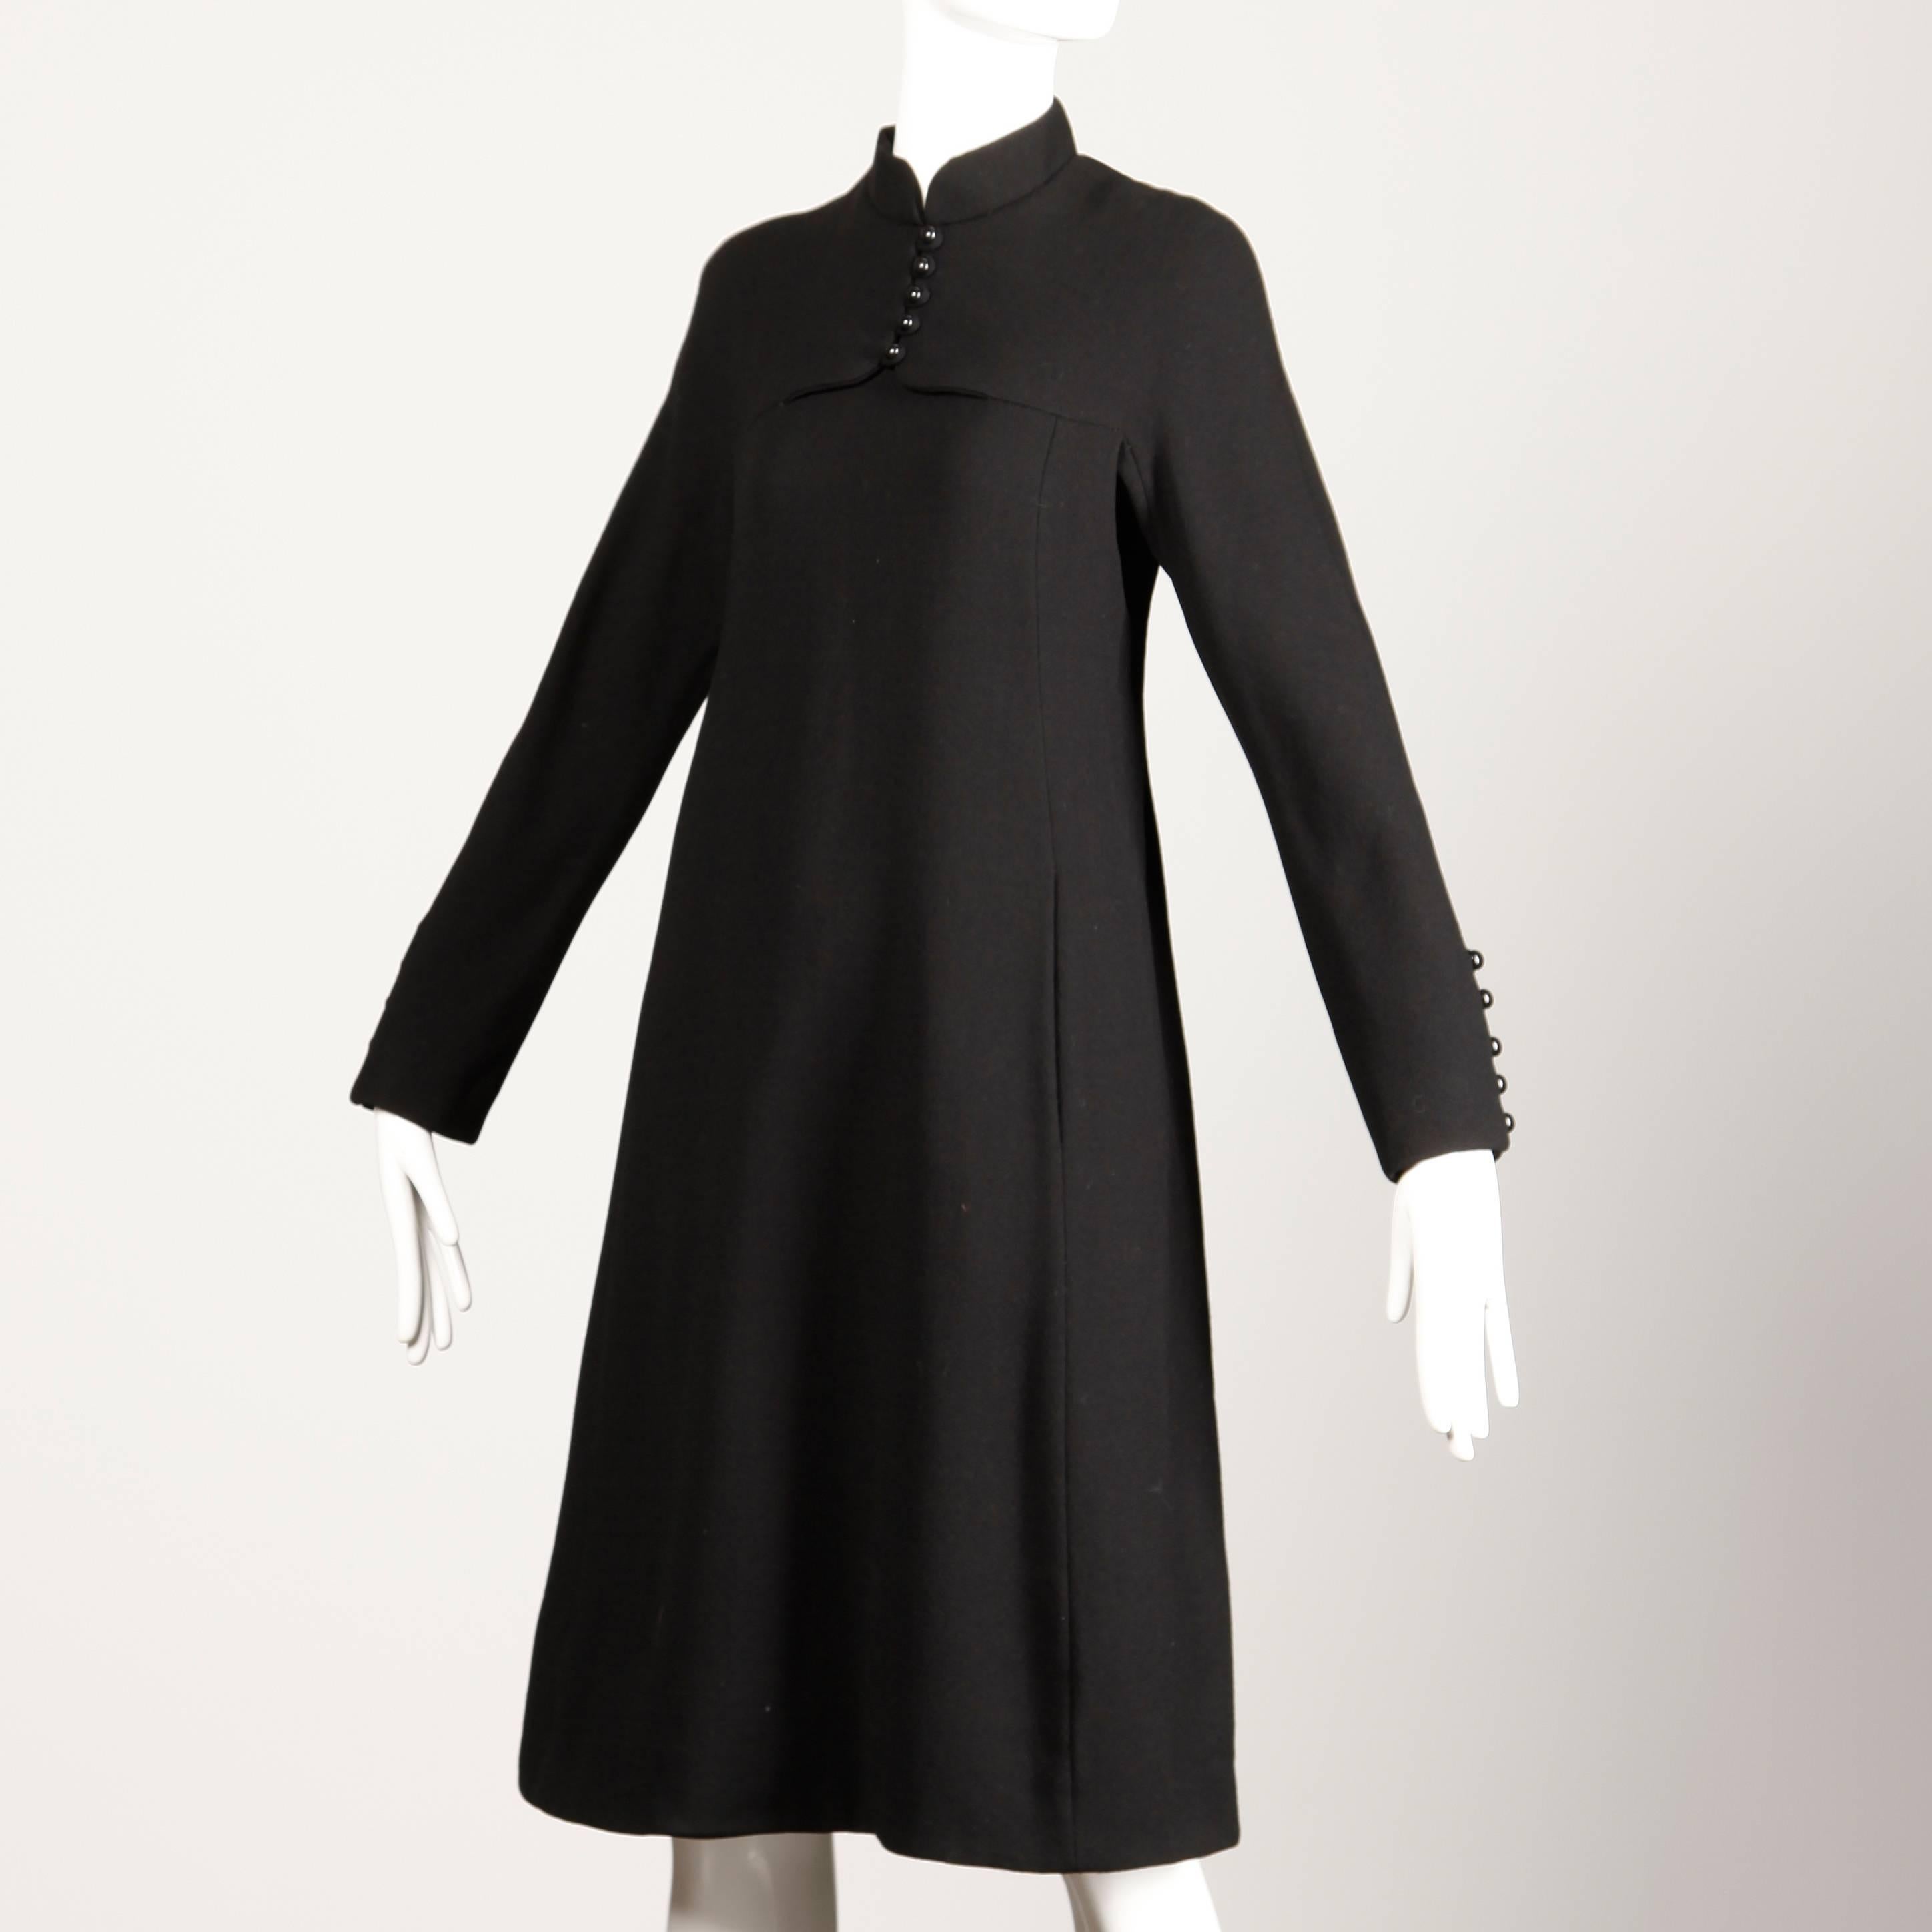 Vintage 1960s black wool Geoffrey Beene shift dress with long sleeves and button detail. 

Details: 

Fully Lined In Silk Organza
Front Pockets in Seam
Back Metal Zip Closure
Estimated Size: Medium
Color: Black
Fabric: Wool 
Label: Geoffrey